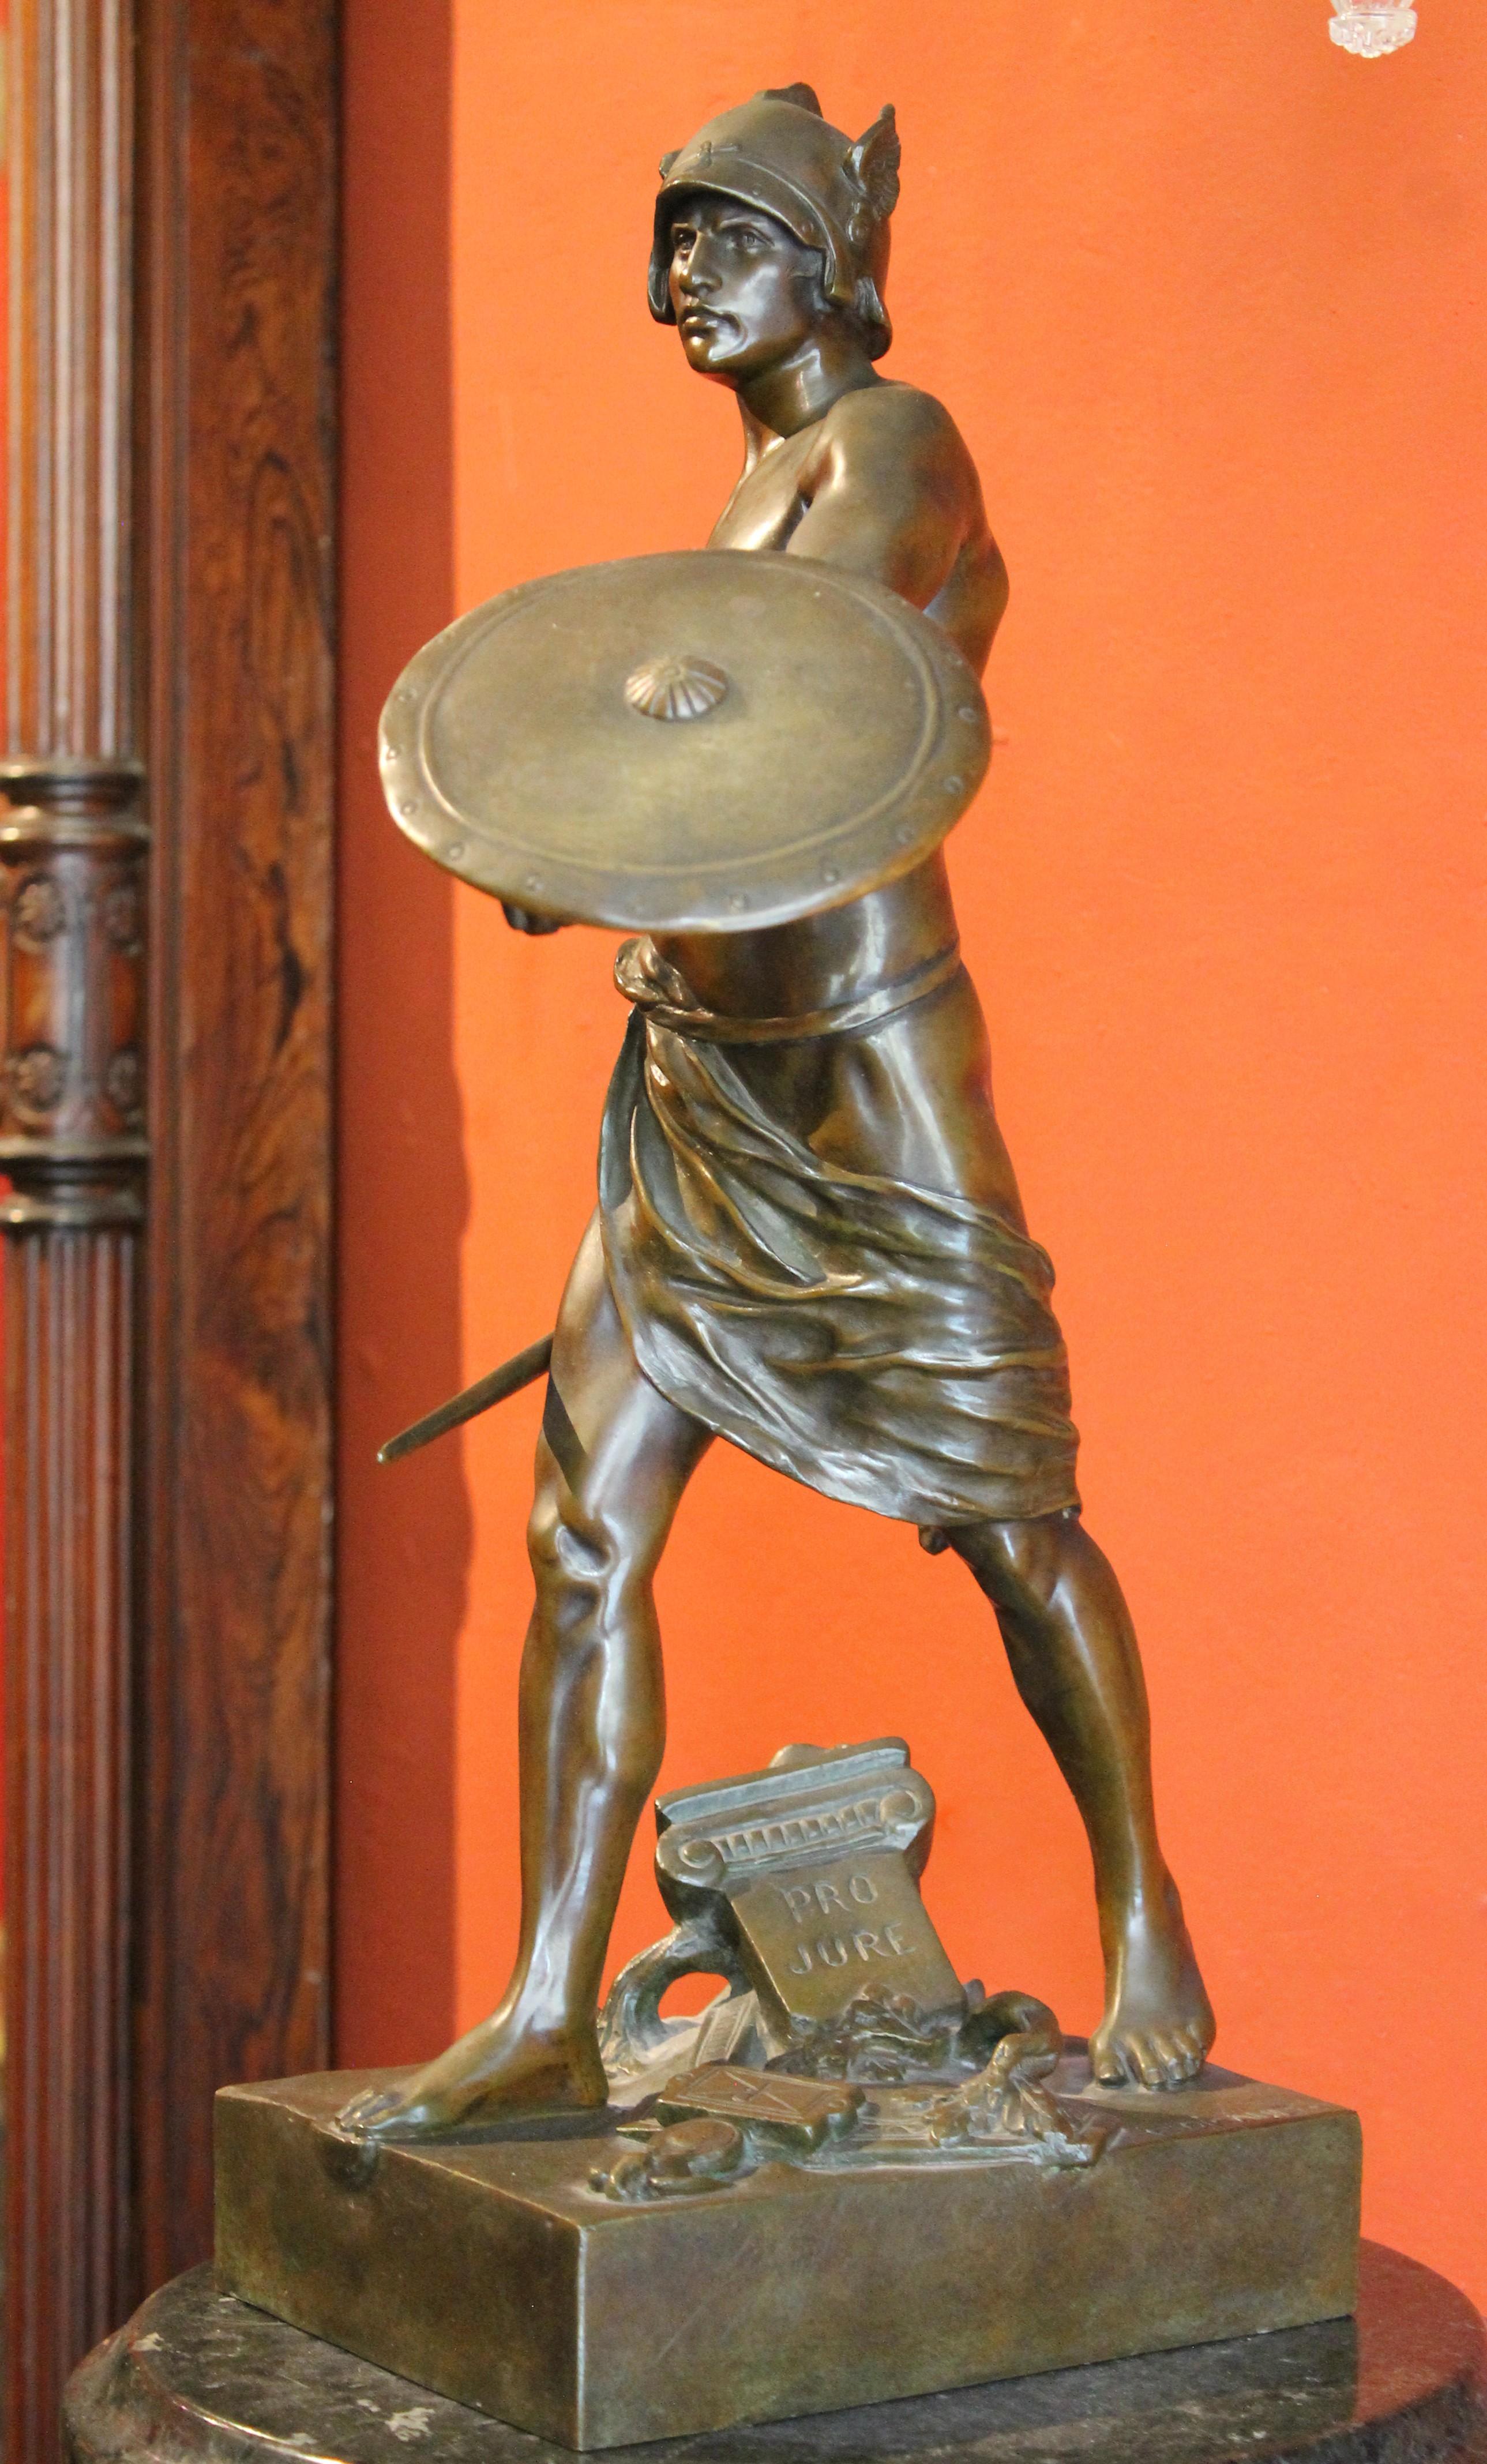 This extraordinary French burnished bronze figurative sculpture featuring a Gallic warrior victorious over the Roman legion was crafted in late 19th Century (1890 ca) by famed French sculptor E´mile-Louis Picault, one of the most celebrated